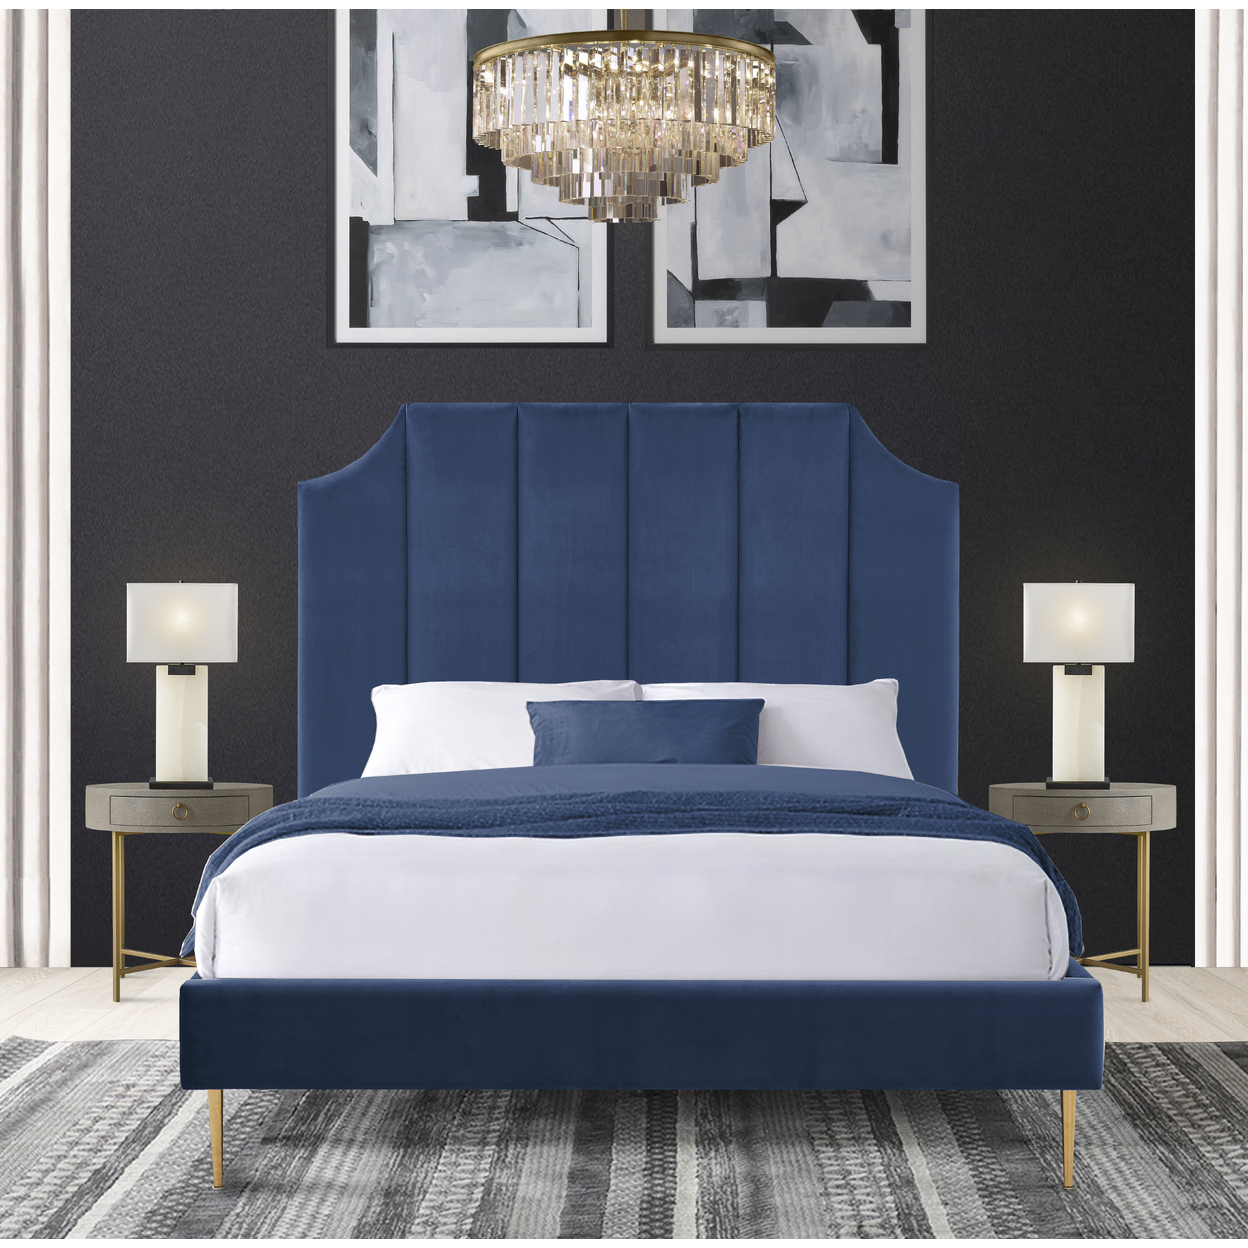 Iconic Home Evian Platform Bed Frame With Headboard Velvet Upholstered Vertical Channel Quilted, Modern Contemporary - Navy, Queen